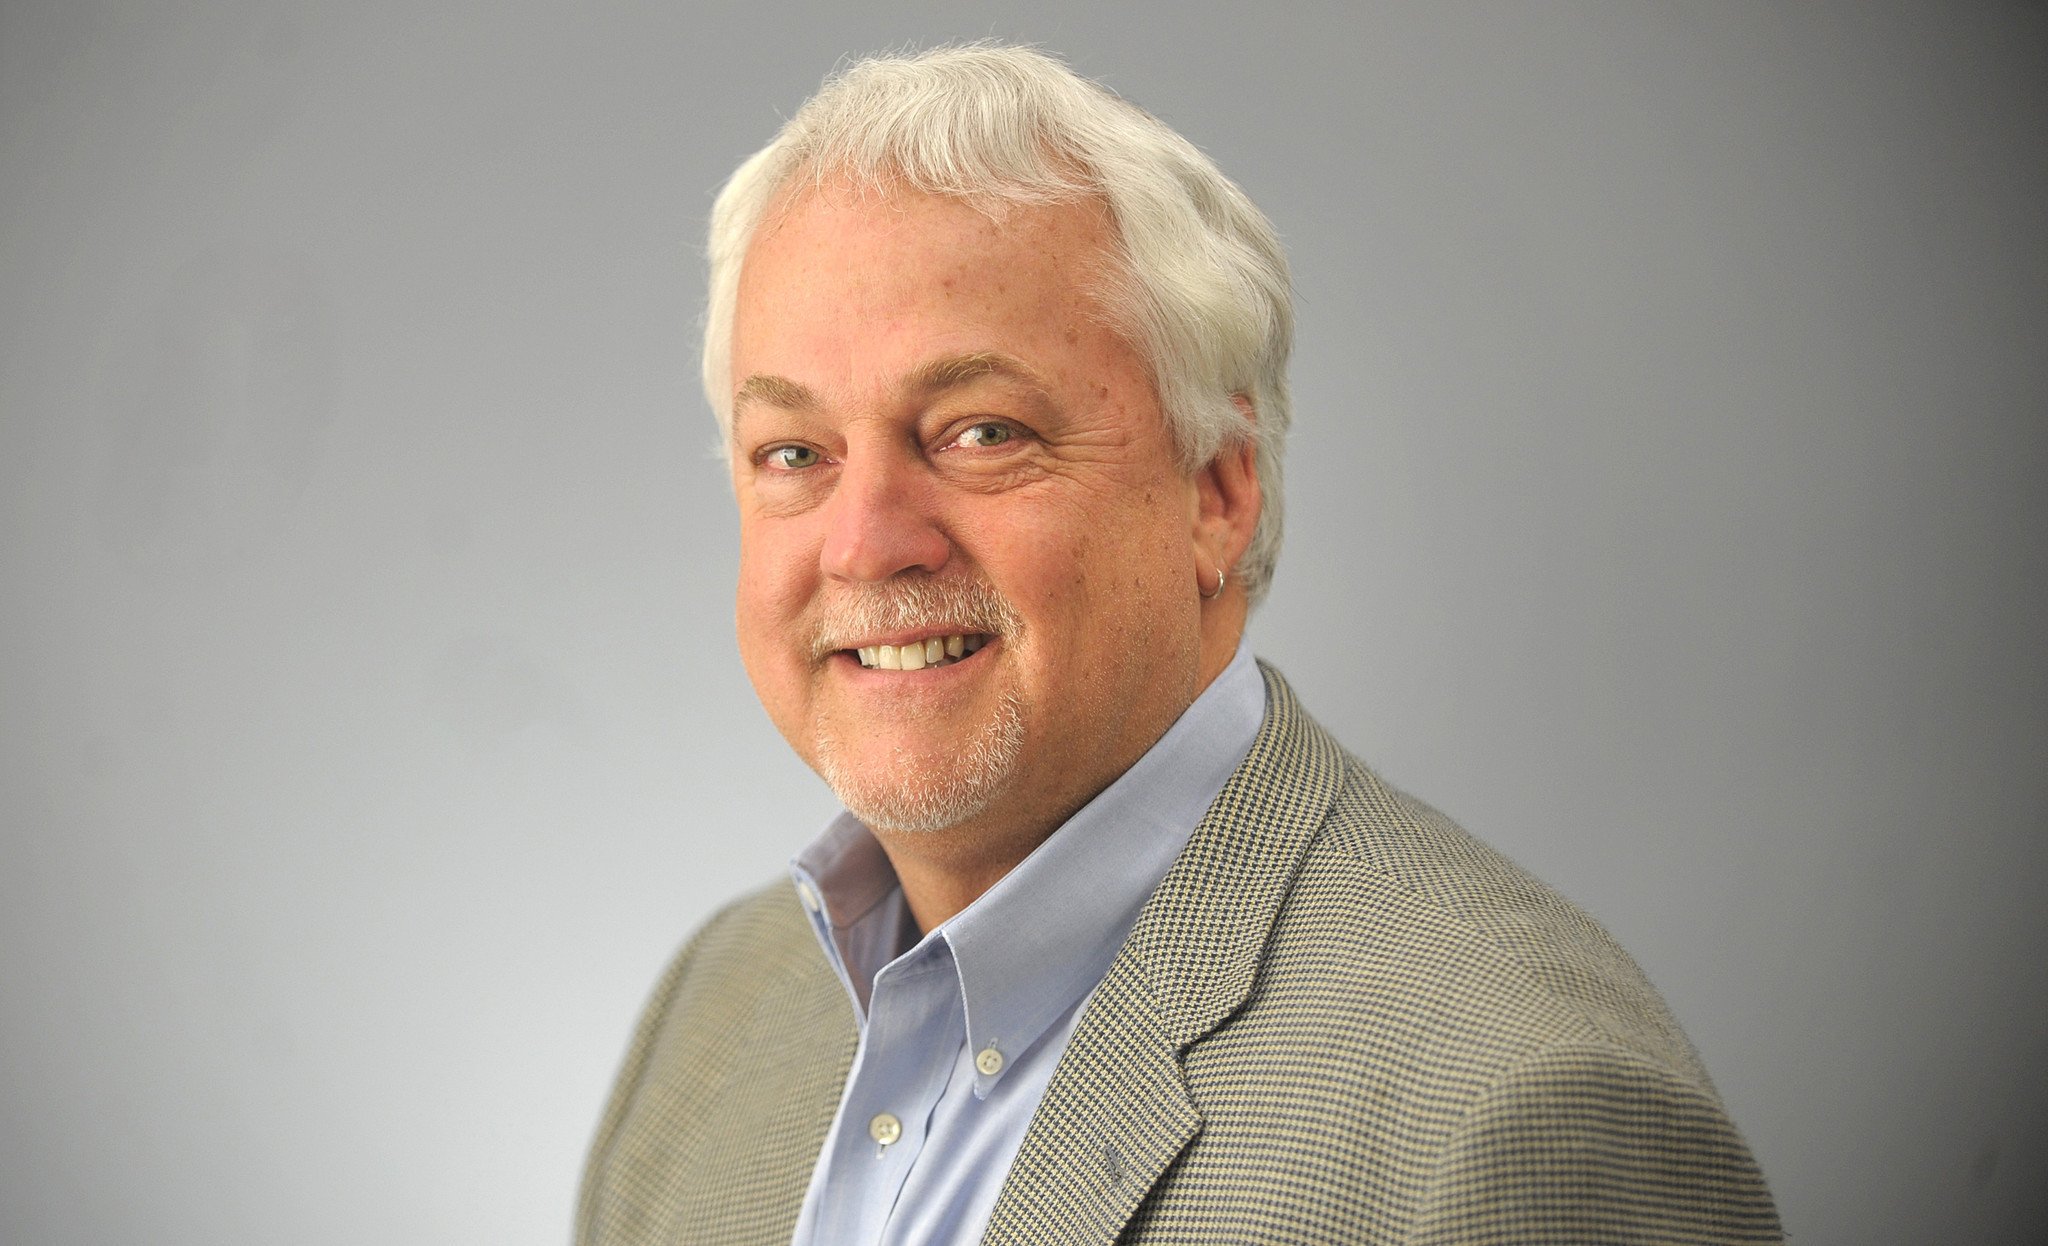 This image obtained from the Capital Gazette shows Capital Gazette Assistant Editor and Columnist Rob Hiaasen, one of the victims of the June 28, 2018, shooting at the newspaper in Annapolis, Maryland.